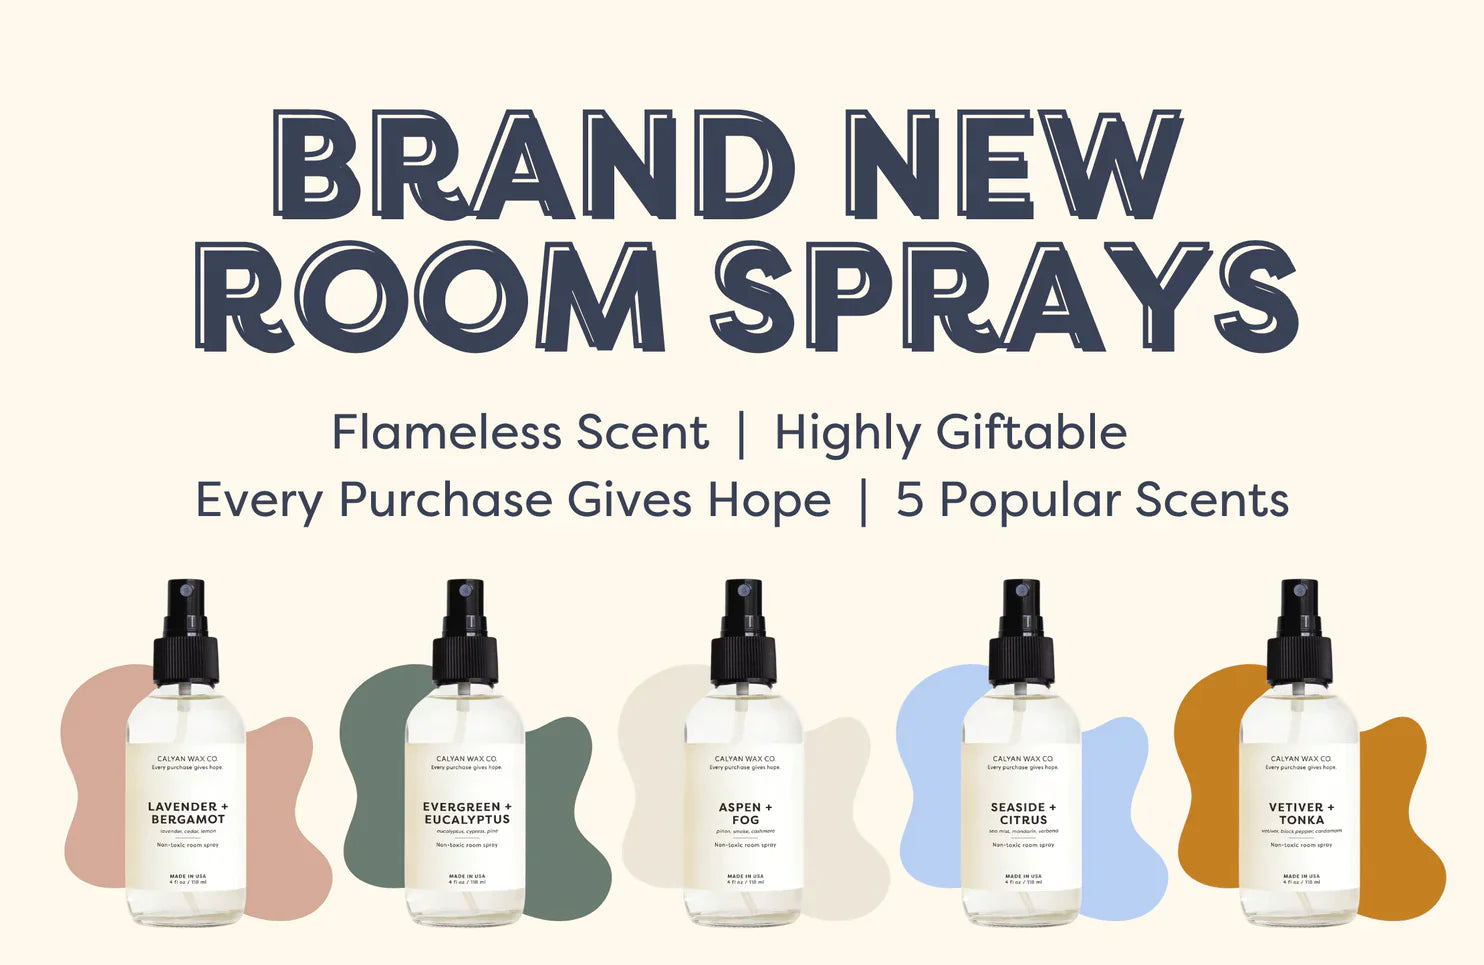 Image of 5 brand new room sprays with selling points. Flameless Scent | Highly Giftable Every Purchase Gives Hope 5 Popular Scents